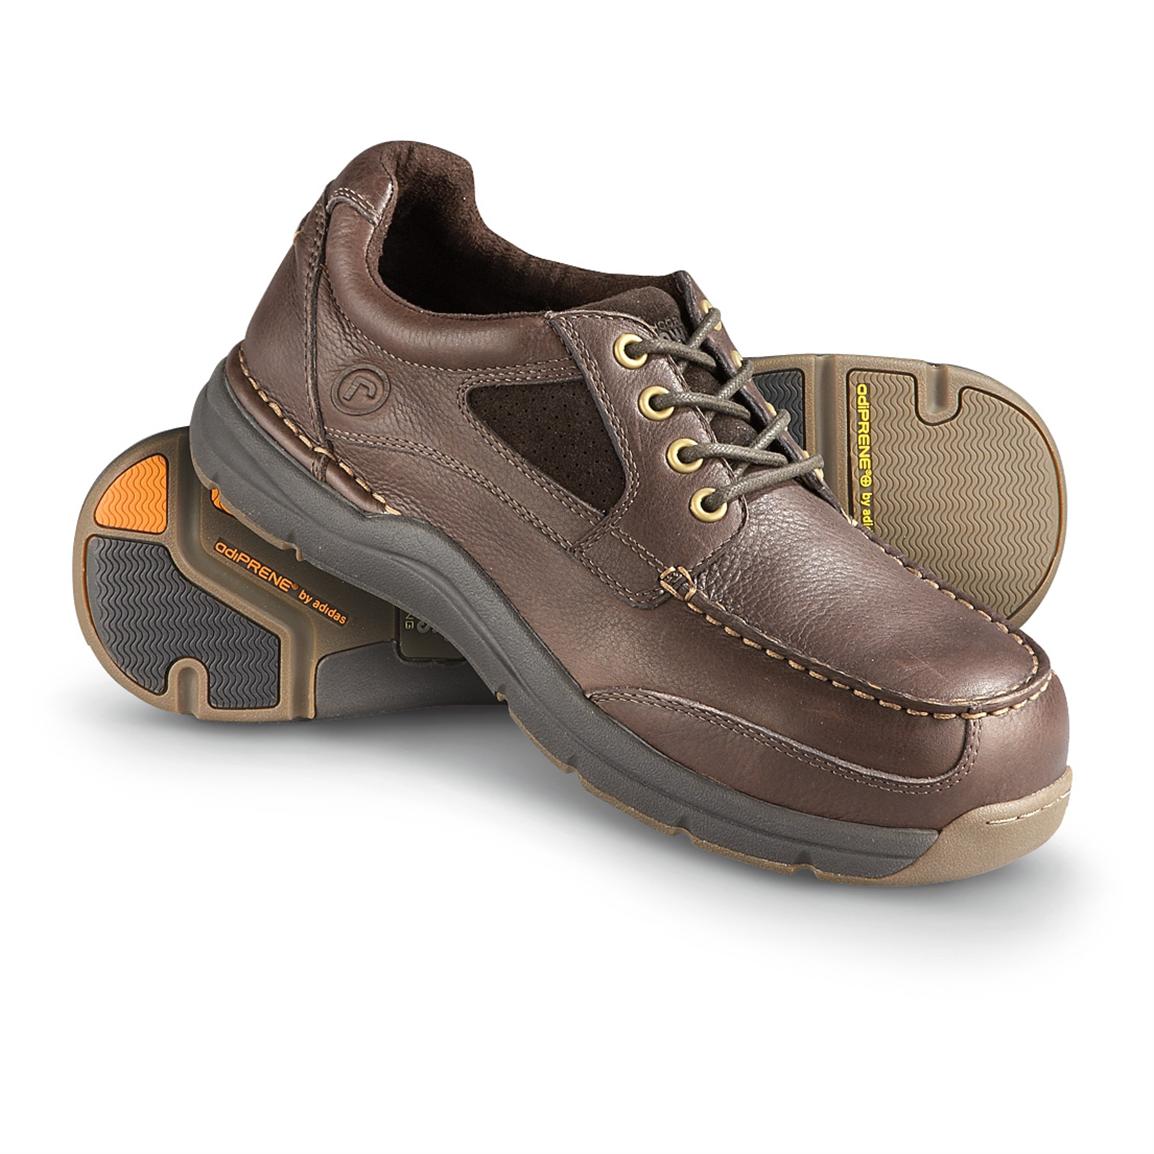 rockport safety shoes canada